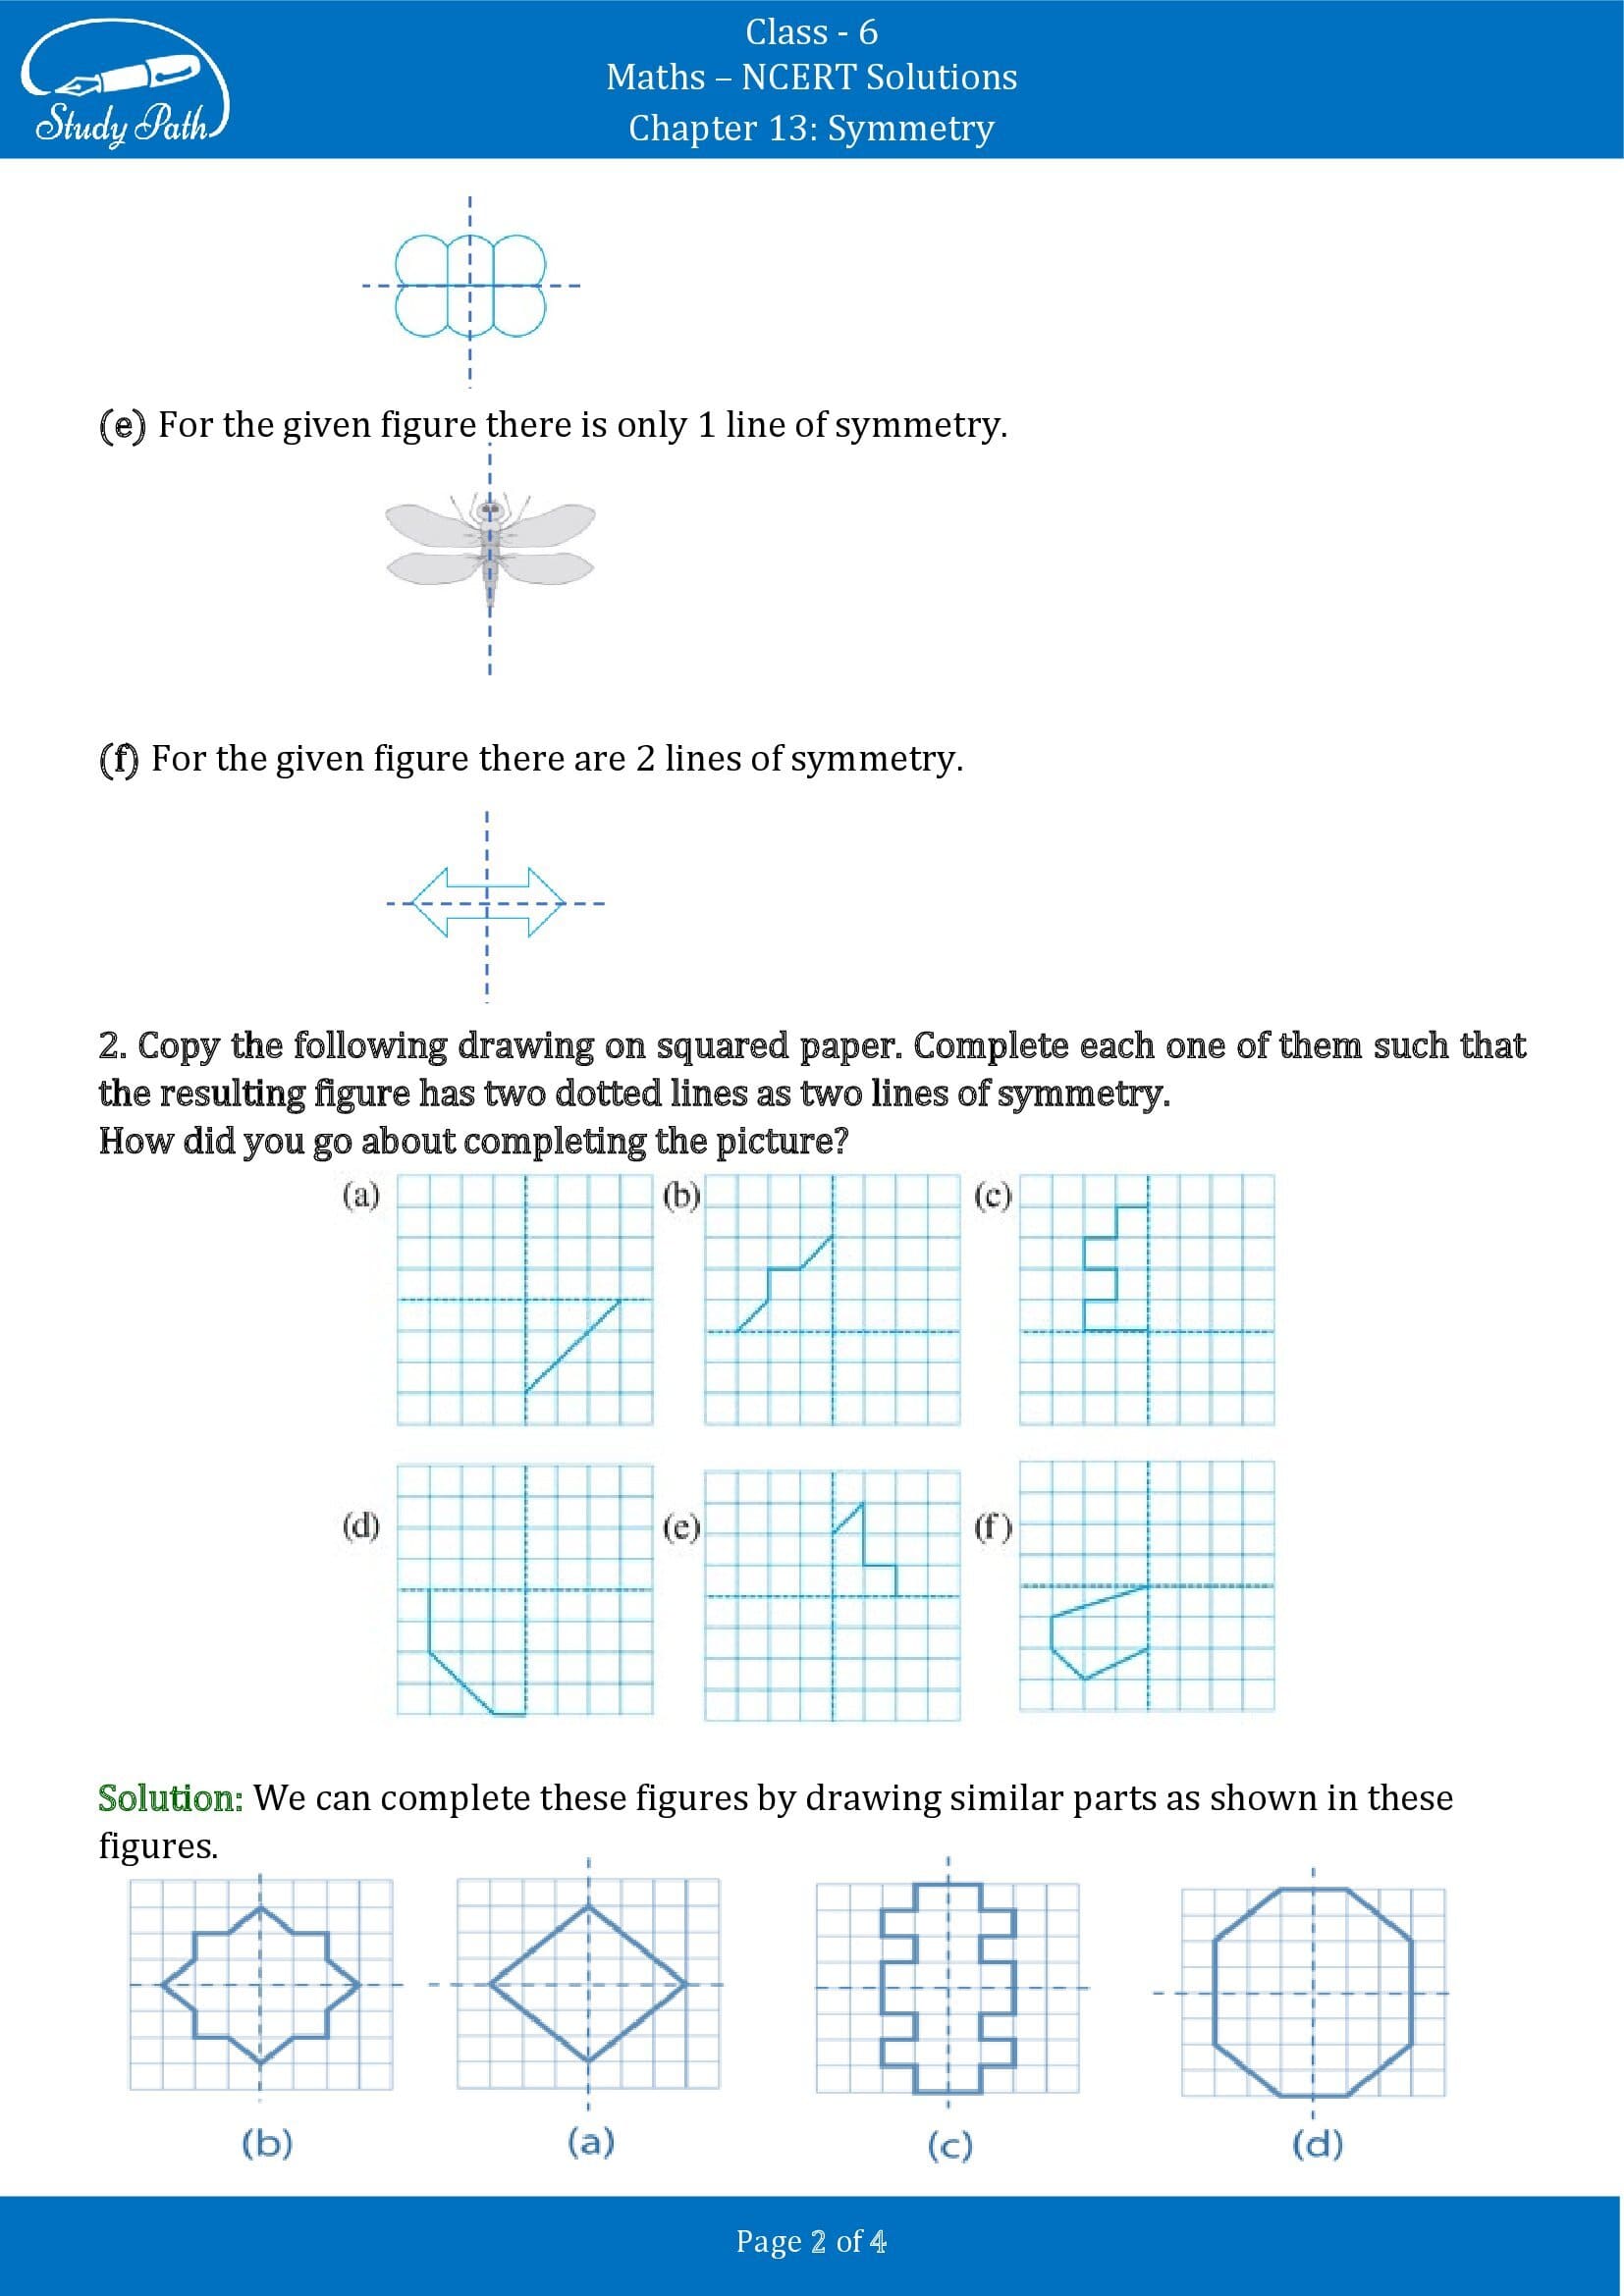 NCERT Solutions for Class 6 Maths Chapter 13 Symmetry Exercise 13.3 00002